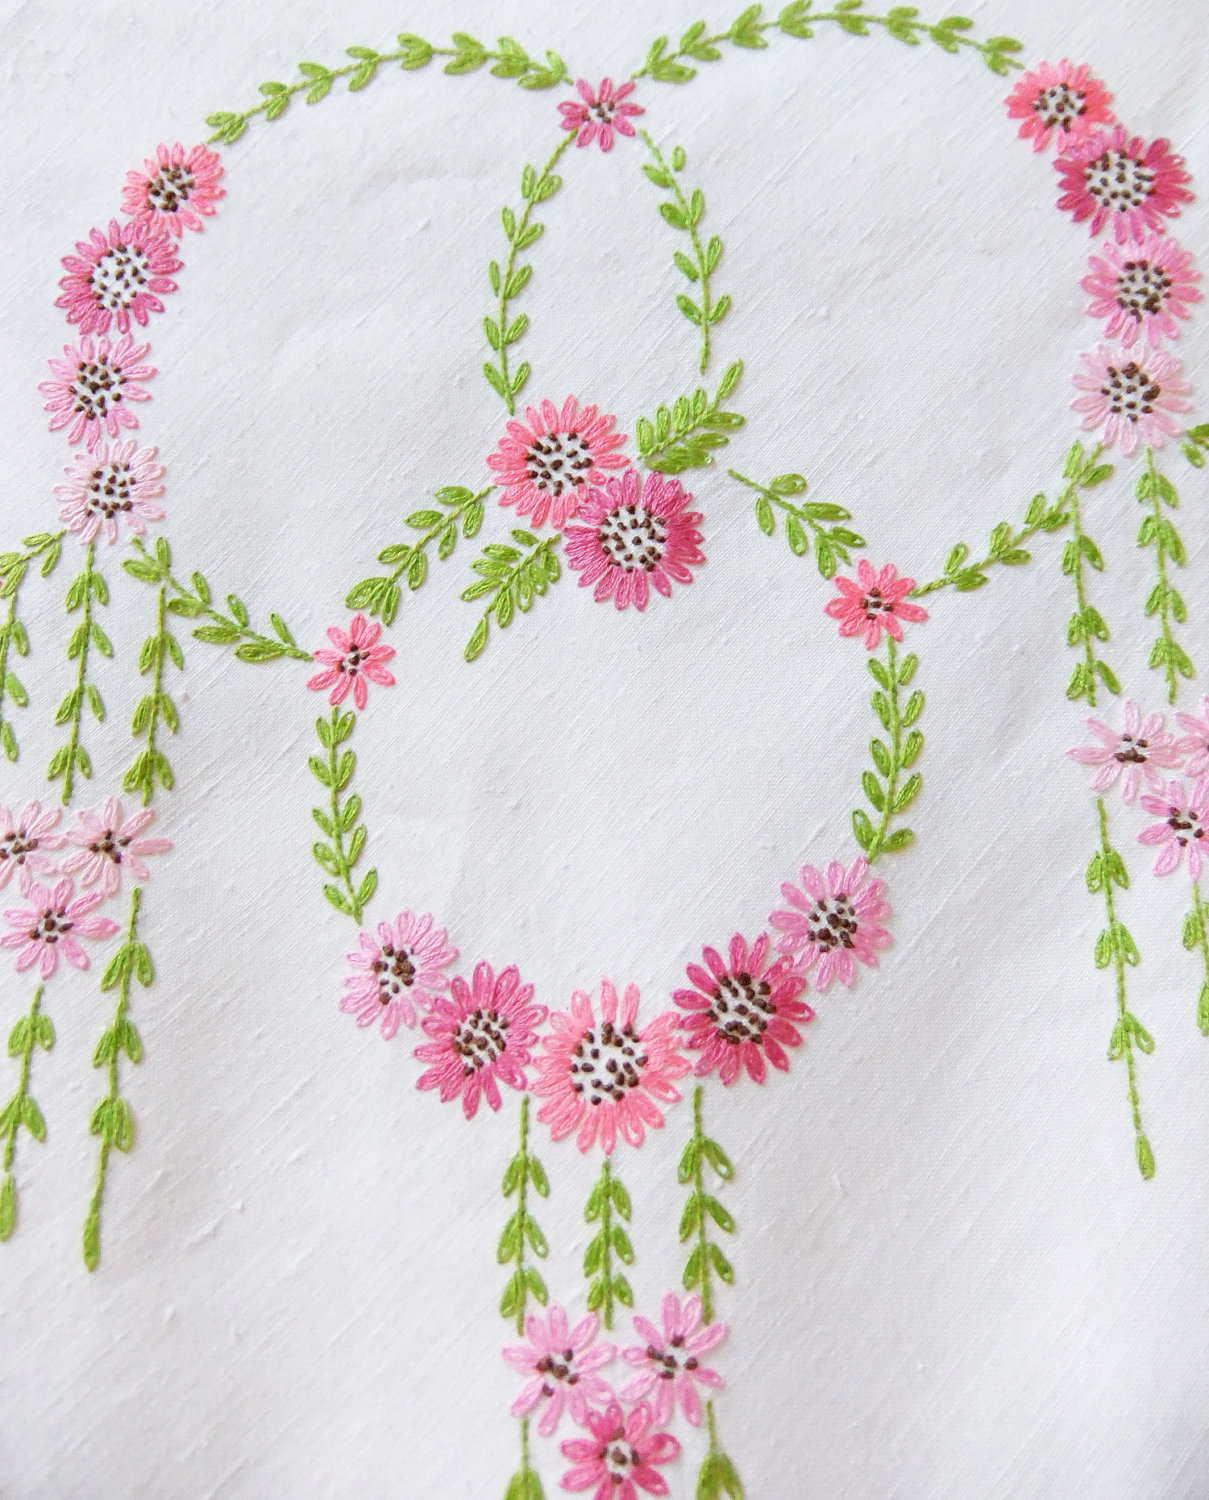 Hand Embroidery Patterns For Tablecloth 12 Best Photos Of Hand Embroidery Patterns For Table Cloths Hand